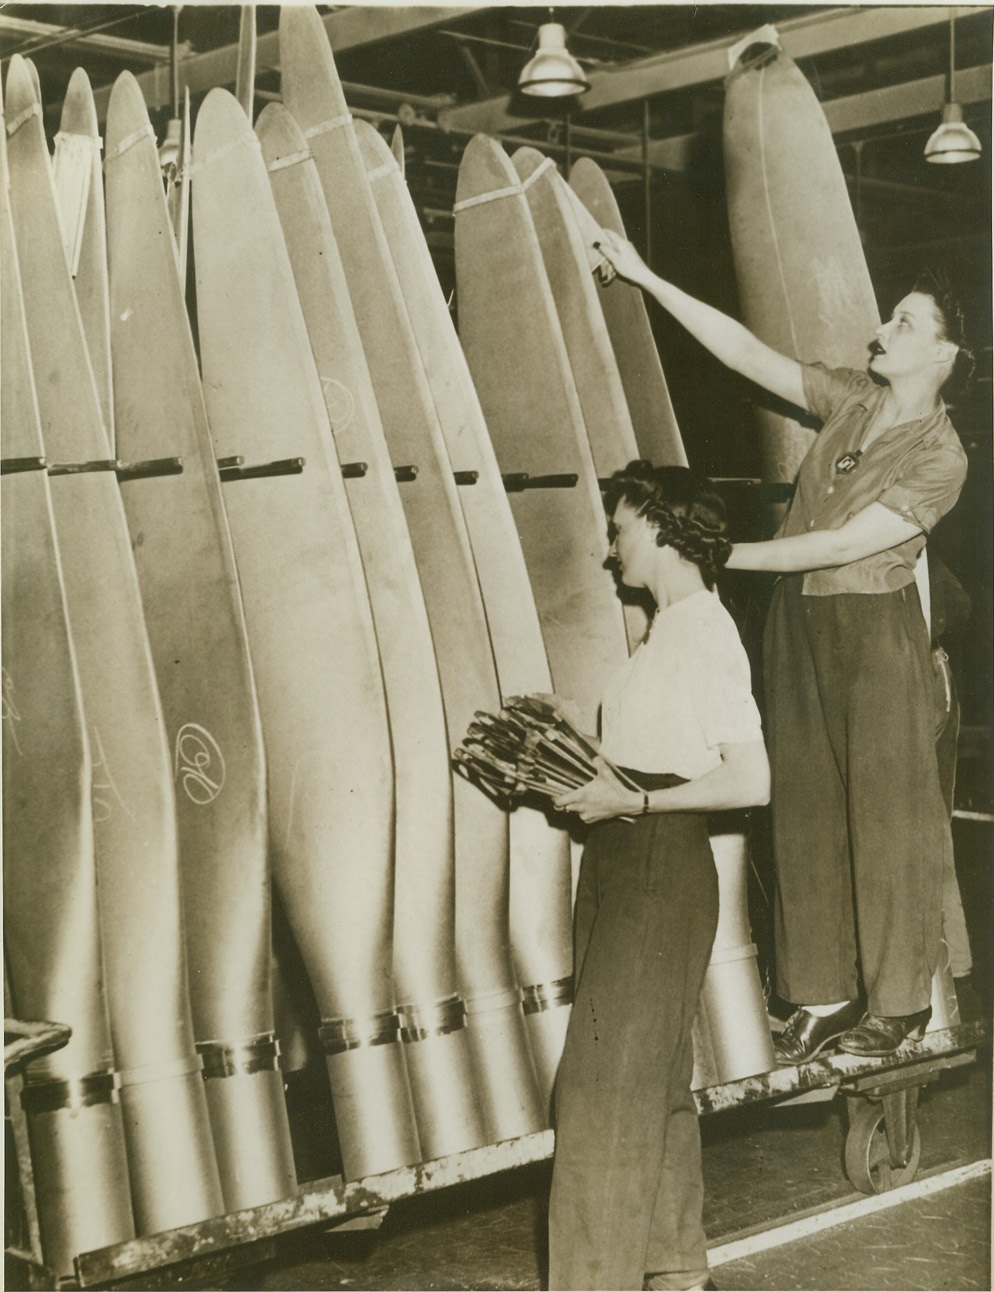 HOLLOW STEEL READY FOR THE SKYWAYS, 6/20/1943. PITTSBURGH DISTRICT, PA. – Gleaming hollow steel propellers, soon to whirr on United Nations warplanes, are checked on the final assembly line by Kathren Krumpe and Ann Newdonski, workers at a Curtiss-Wright propeller plant in the Pittsburgh district of Pennsylvania. The plant is reported to be the largest producer of hollow ground steel blades in the nation. Credit: ACME;